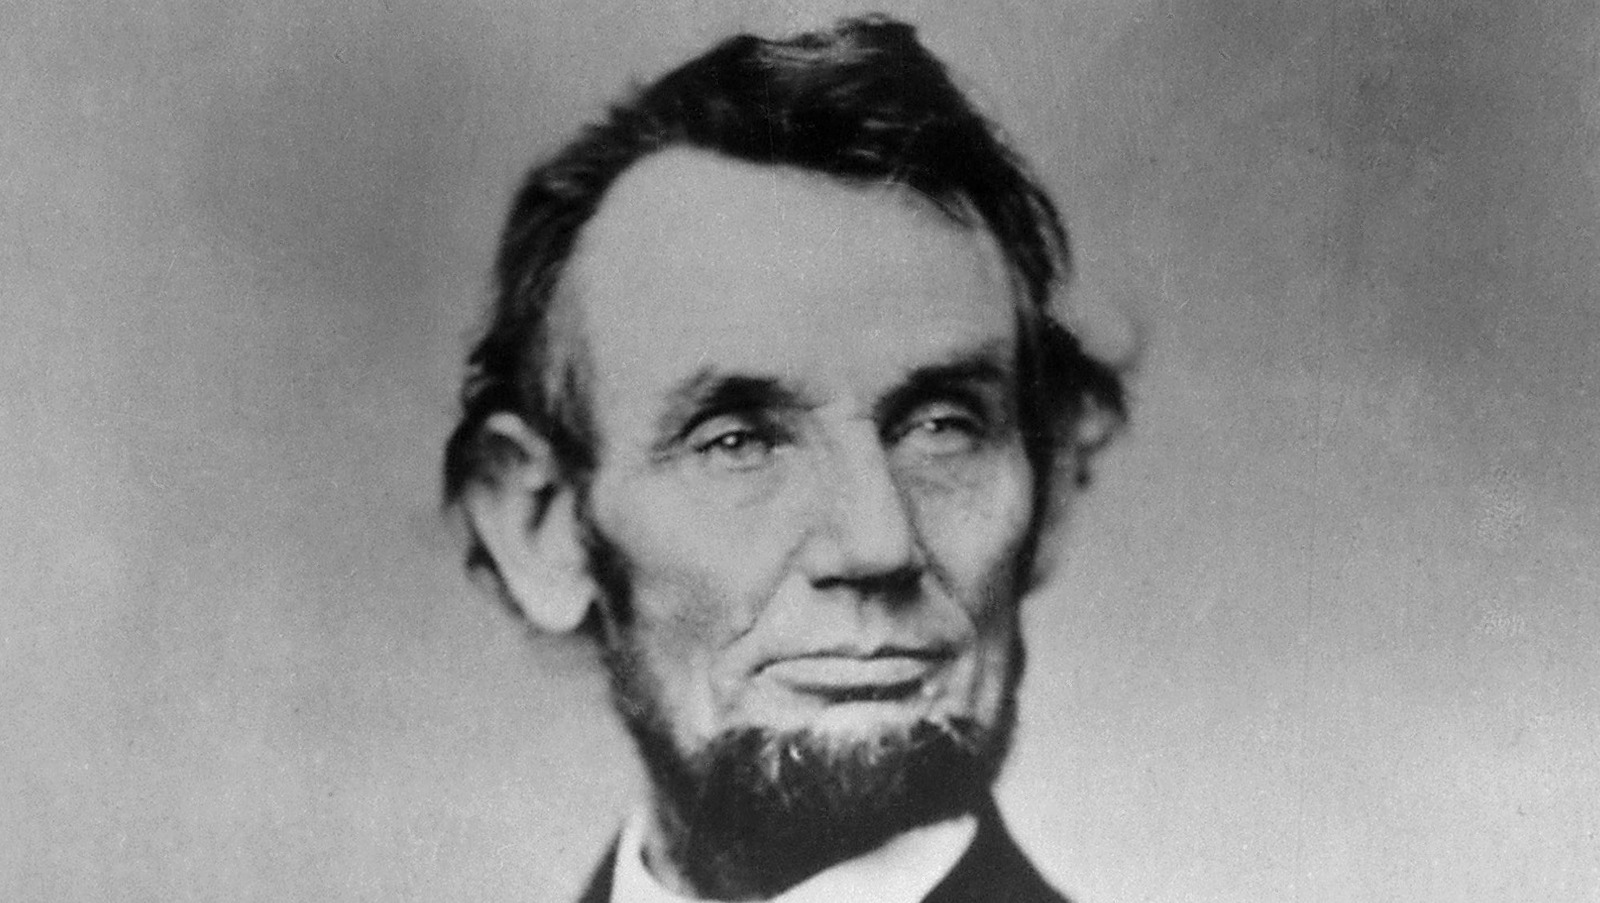 What happened to Lincoln's son Willie? The Tragic Death Of Abraham Lincoln's Son, William